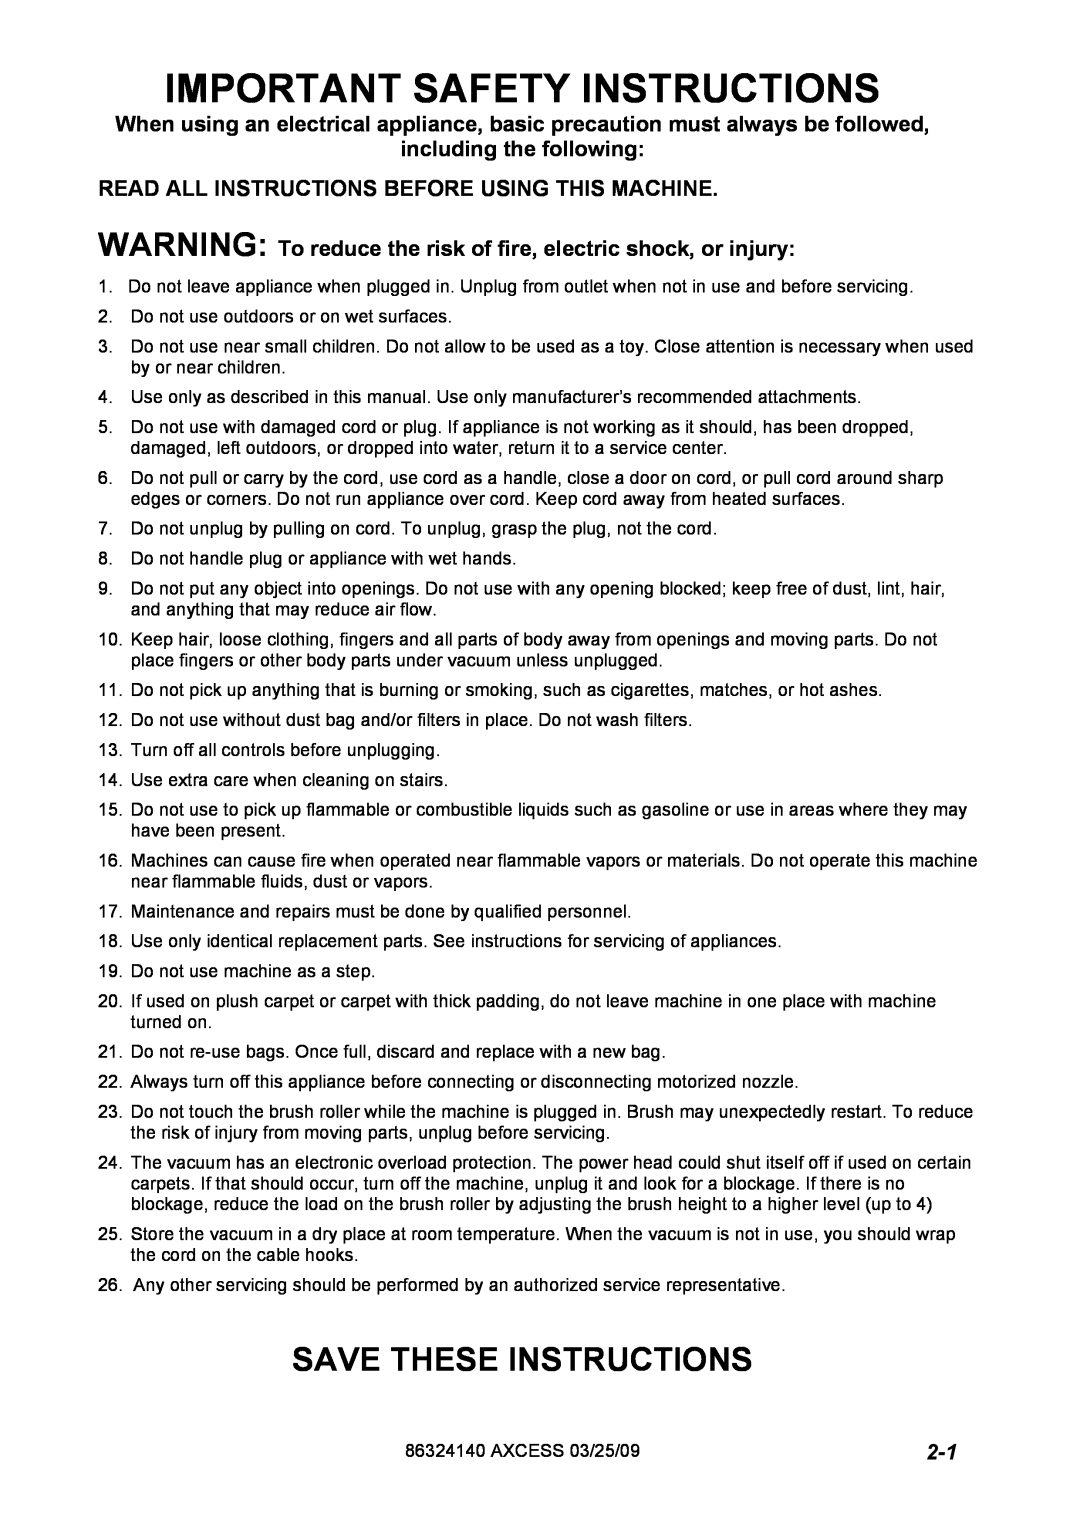 Windsor 1.012-062.0, 1.012-061.0 Important Safety Instructions, Save These Instructions, including the following 